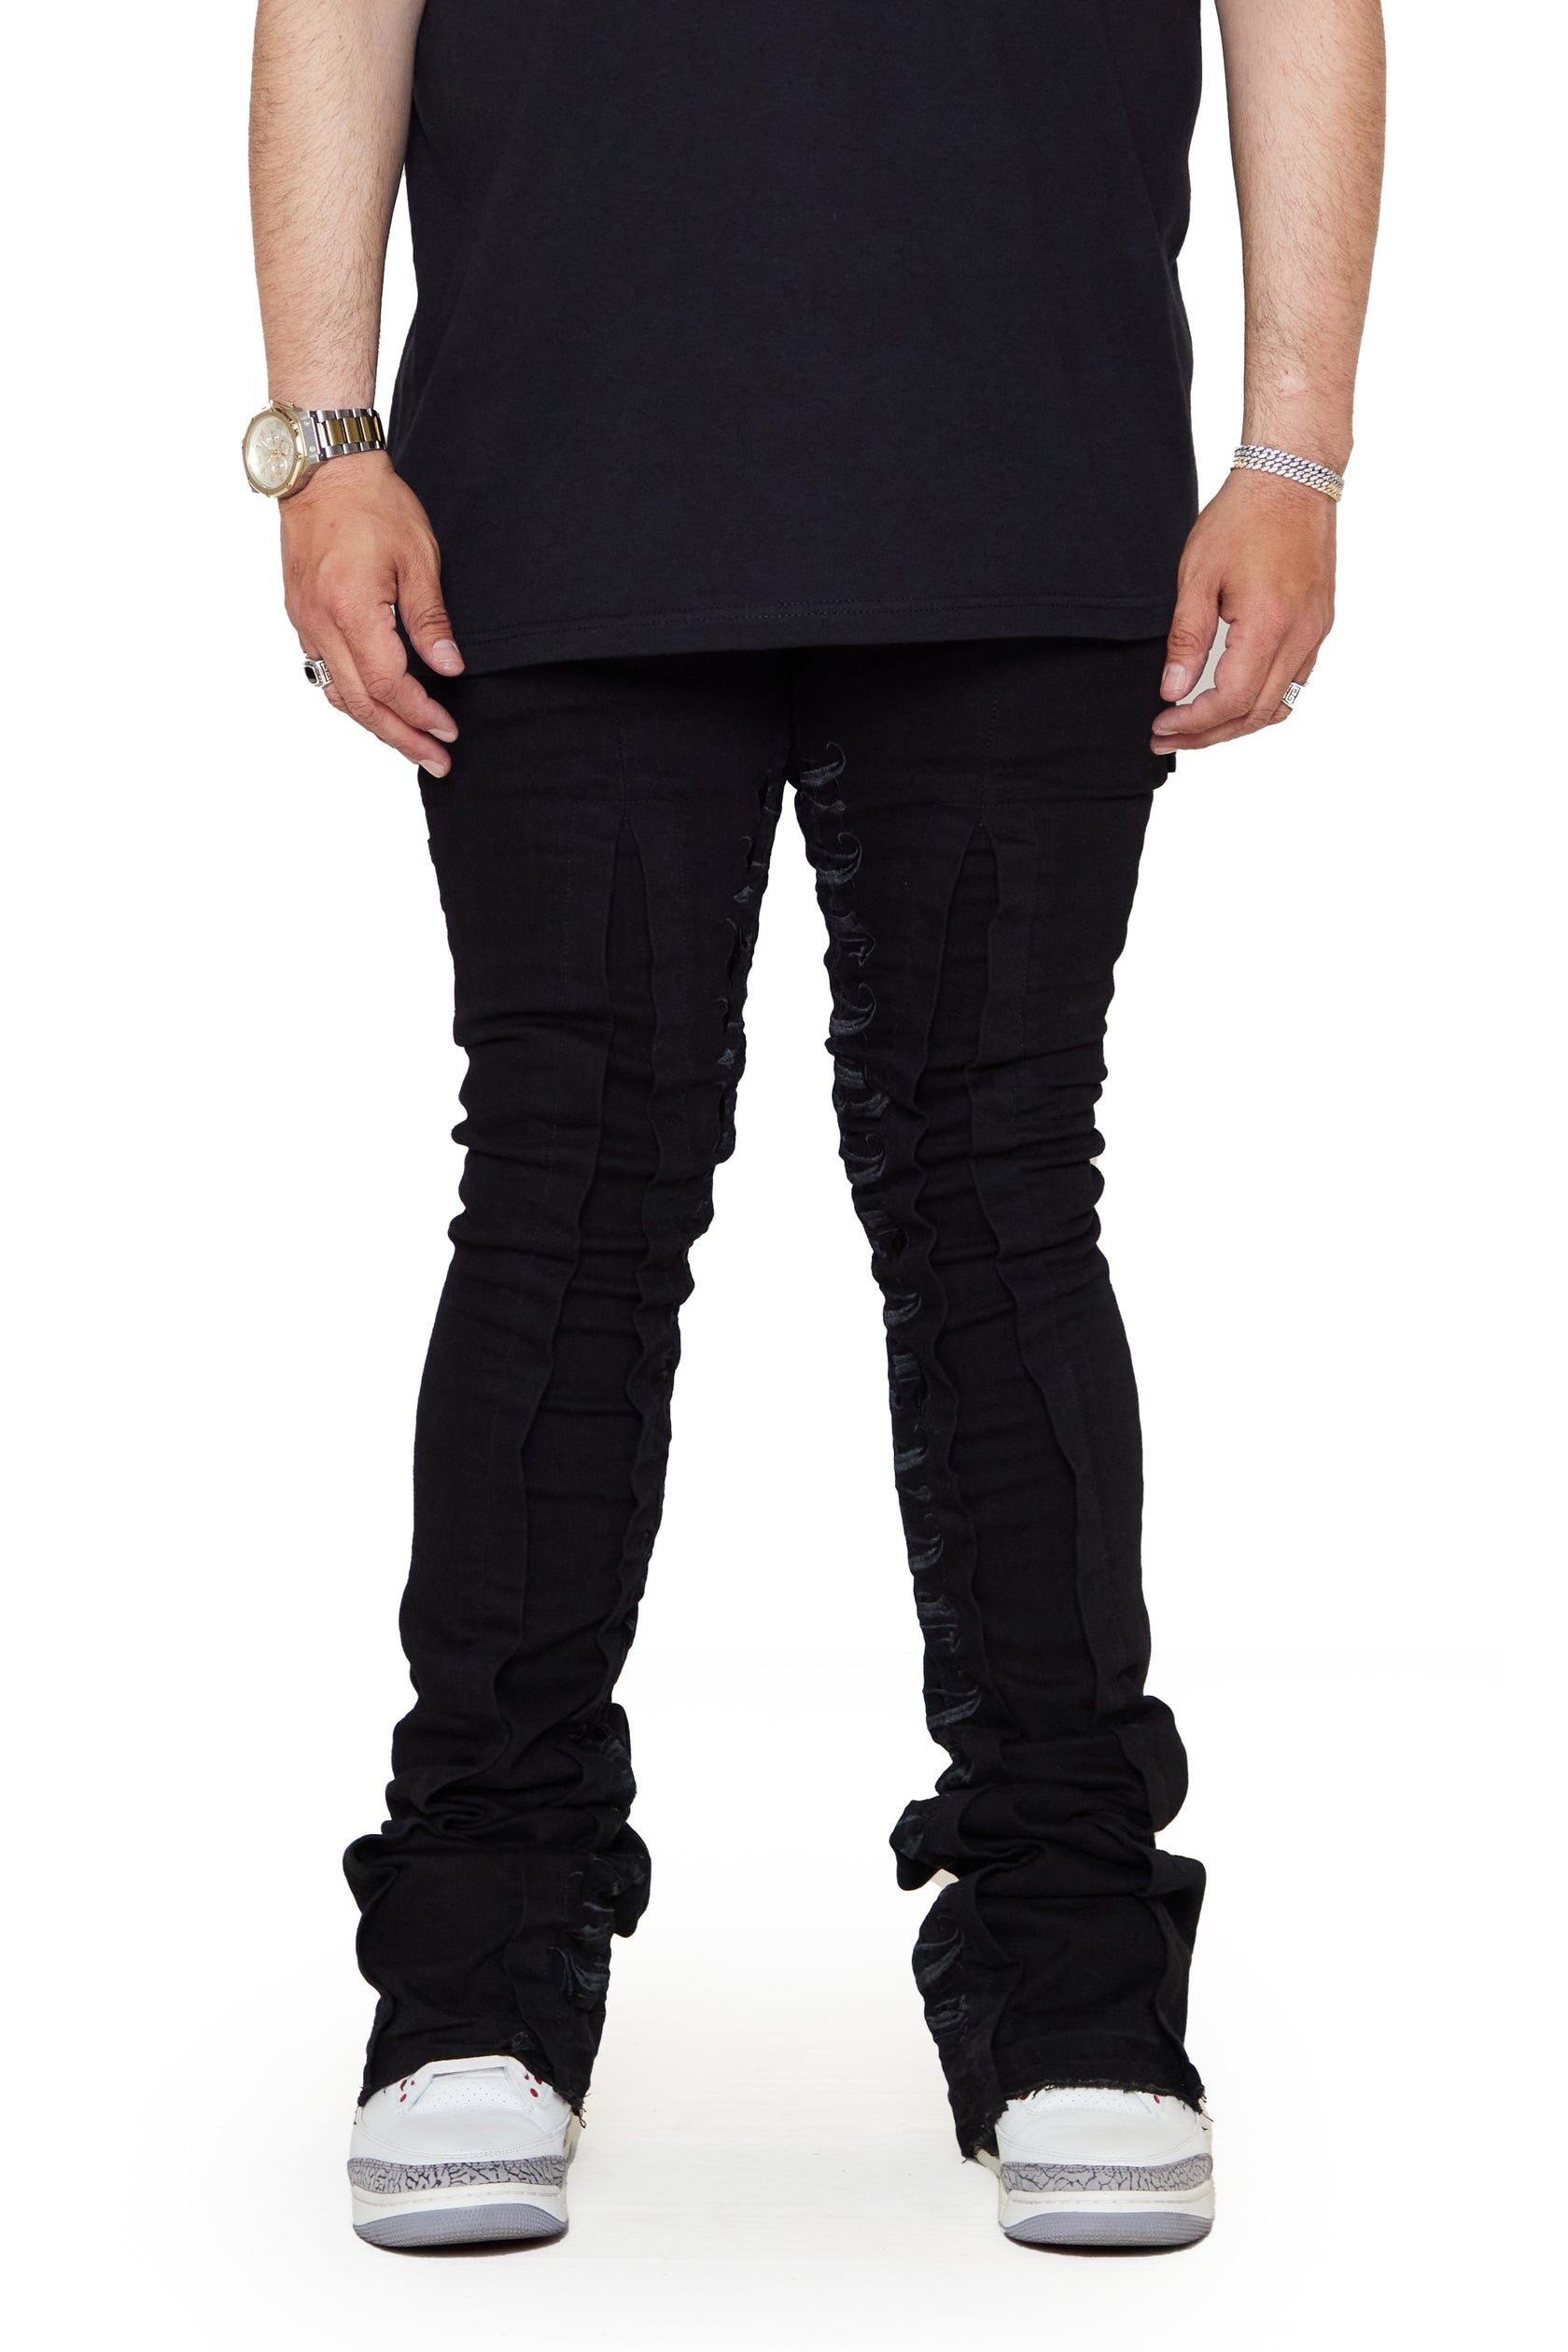 PURPOSE BLACK STACKED FLARE JEAN – Players Closet